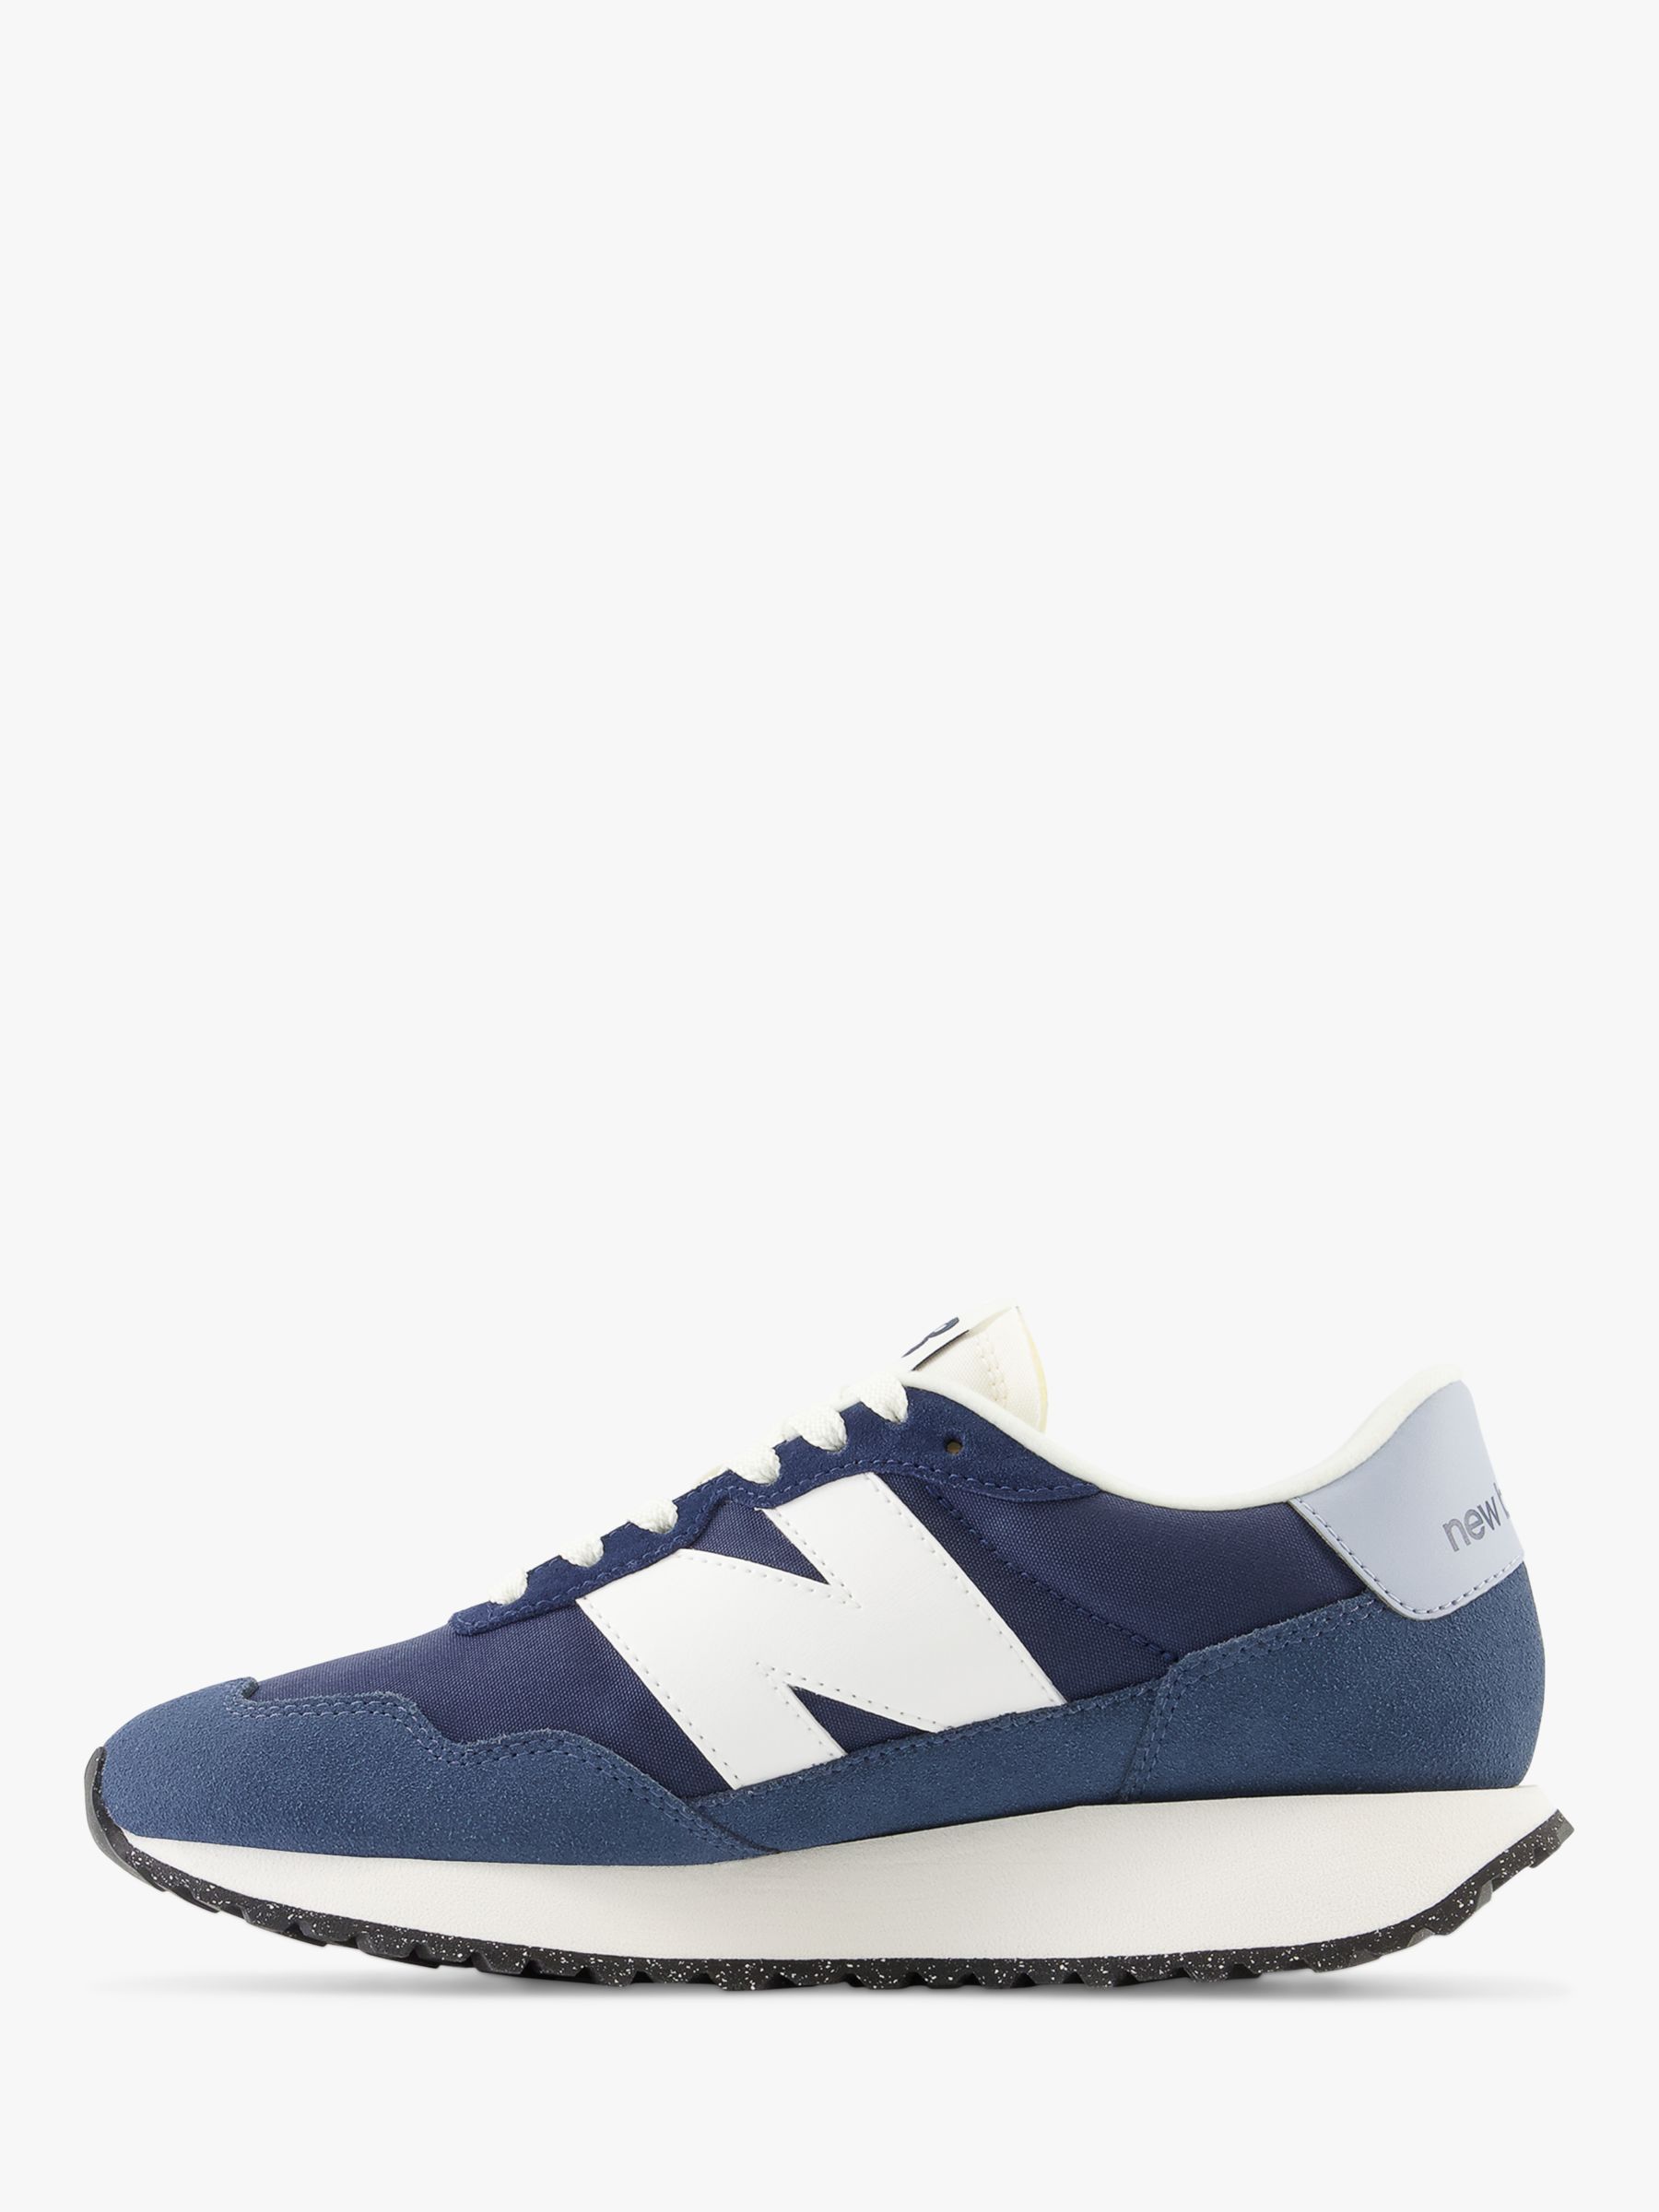 New Balance 237 Suede Mesh Trainers, Navy